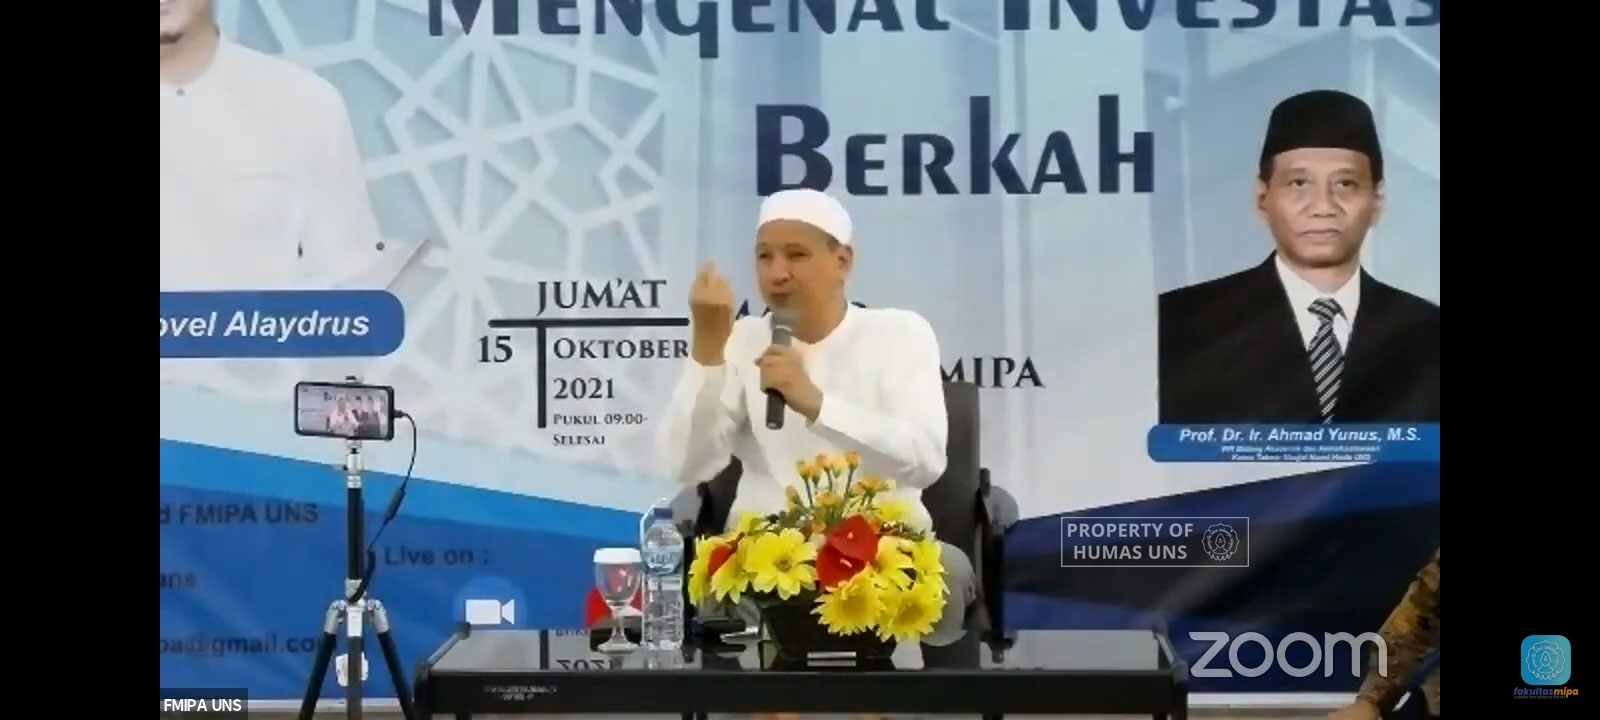 FMIPA UNS 25th Anniversary, Habib Novel Alaydrus Delivered Religious Speech on Blessing of Life